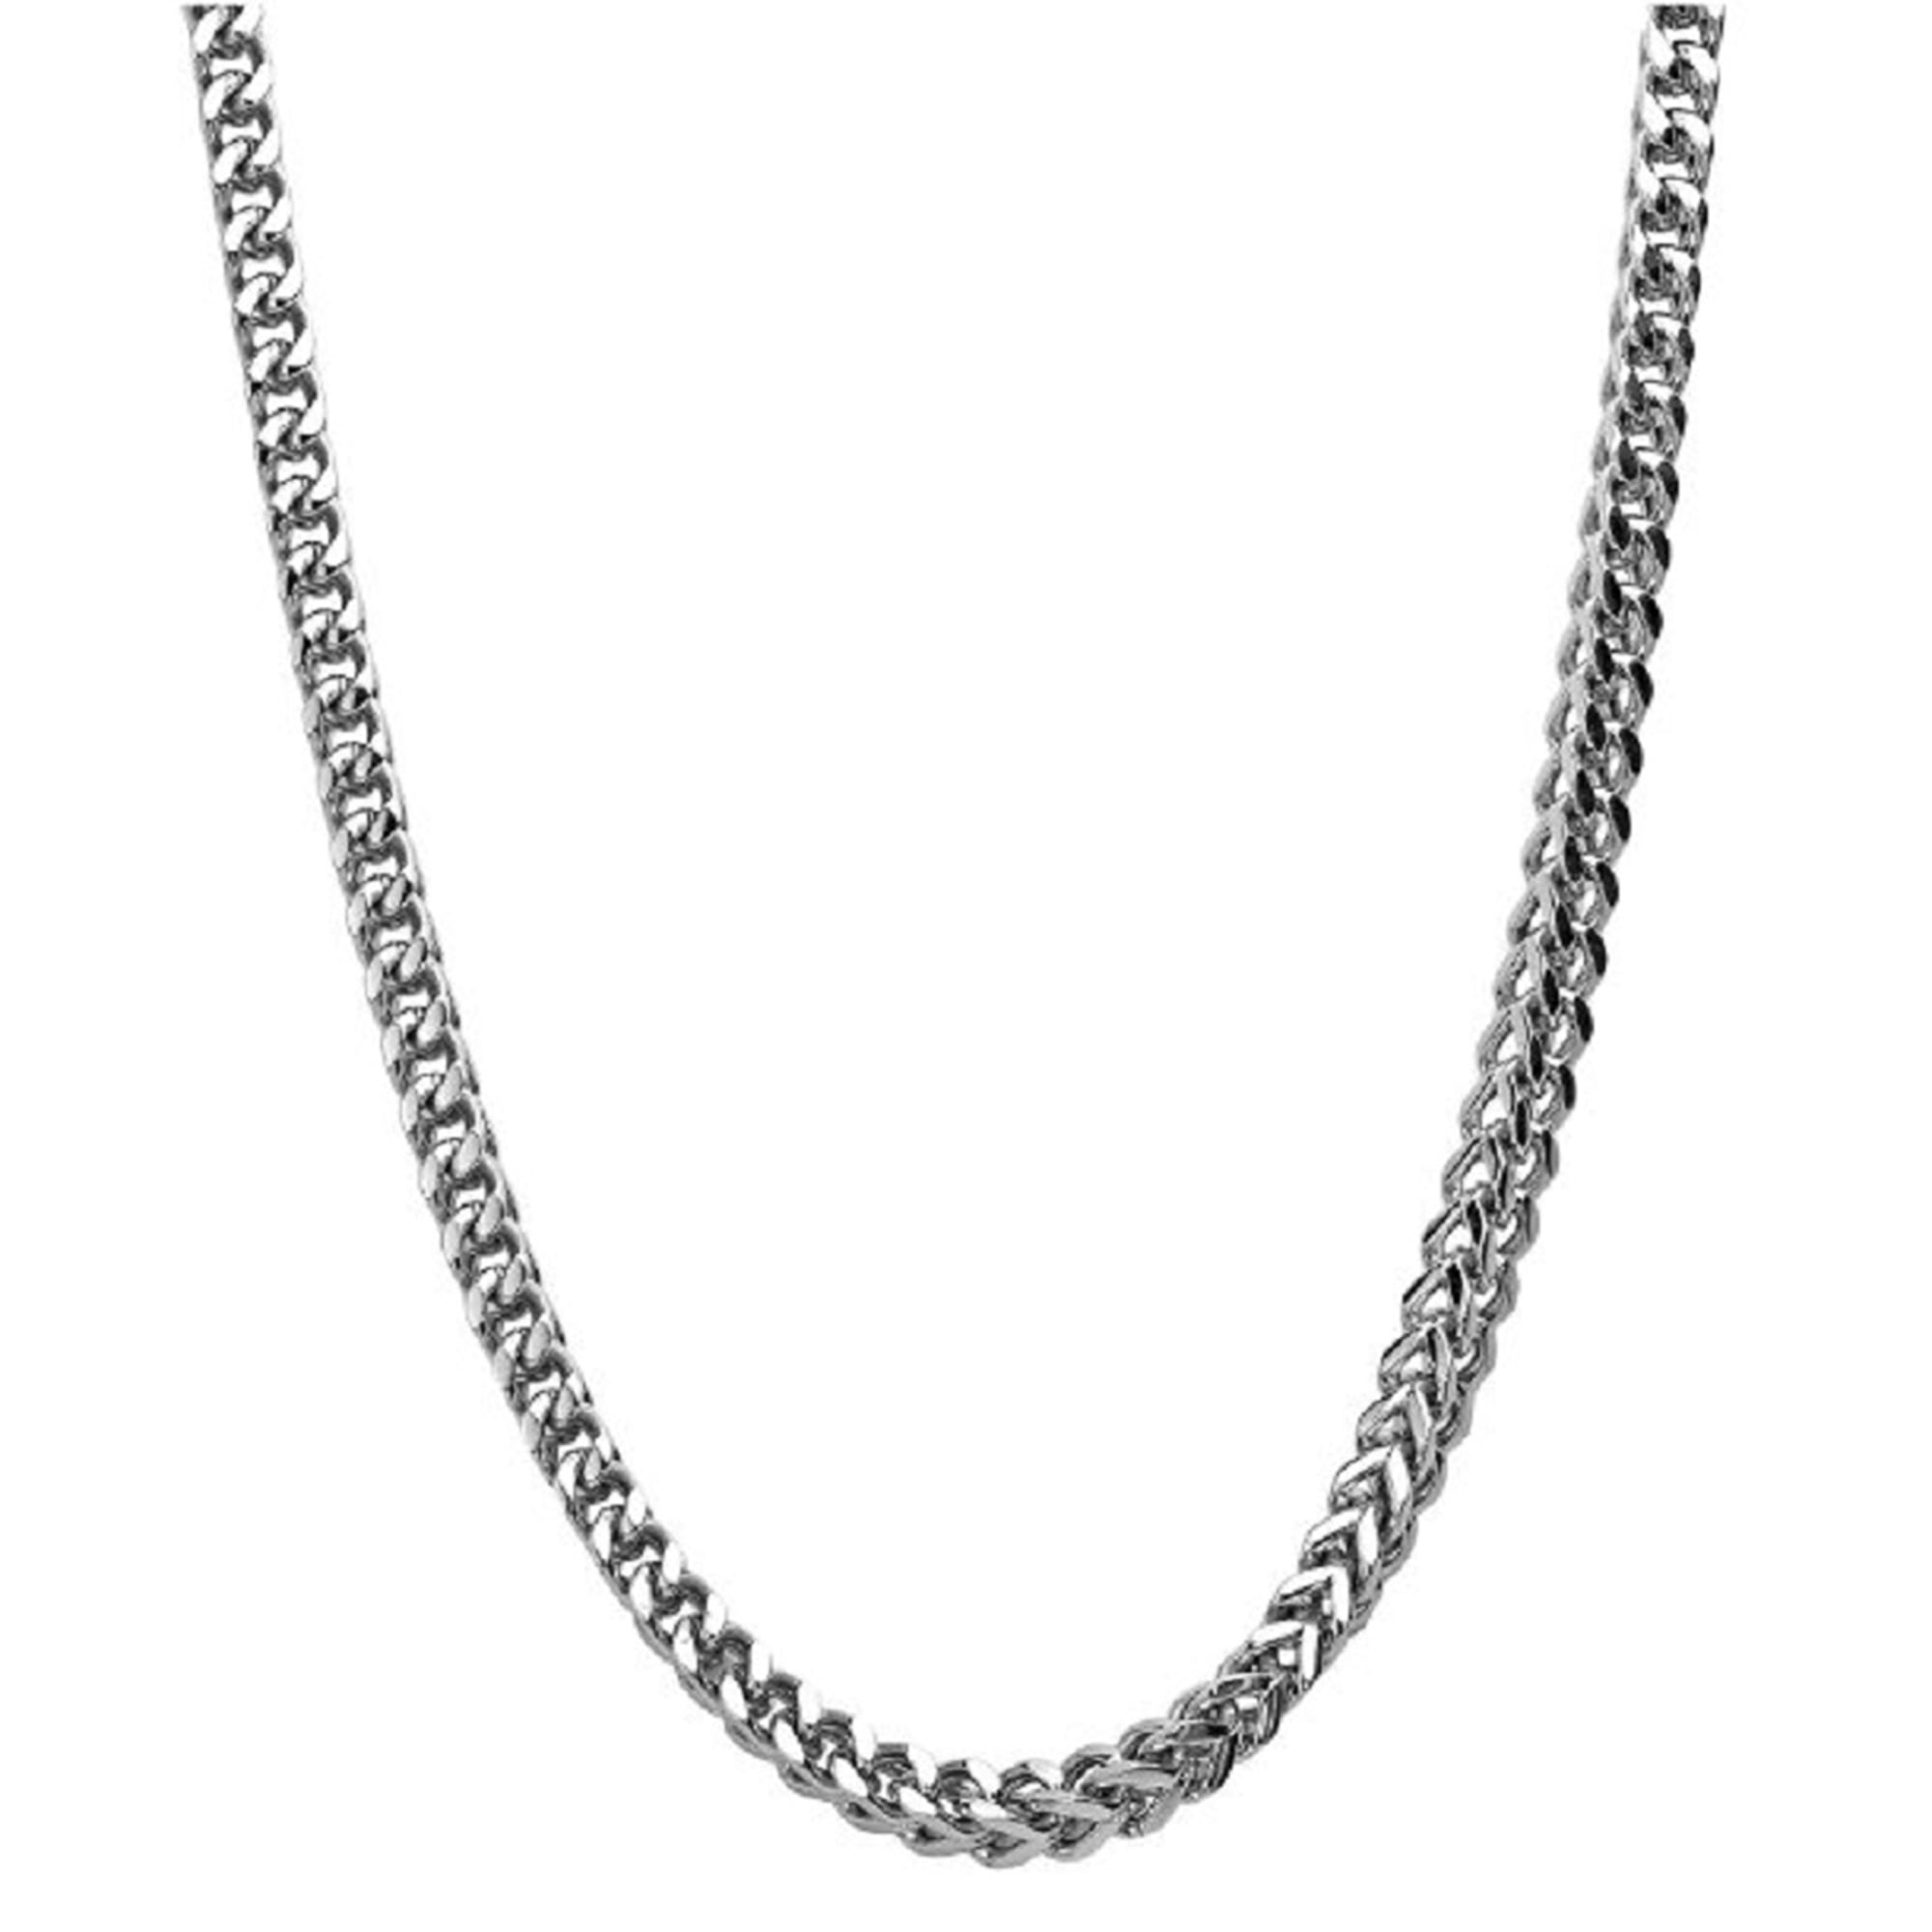 2.2mm-3.2mm 16"-40" Stainless Steel Foxtail Necklace Chain HN10 USA Seller 